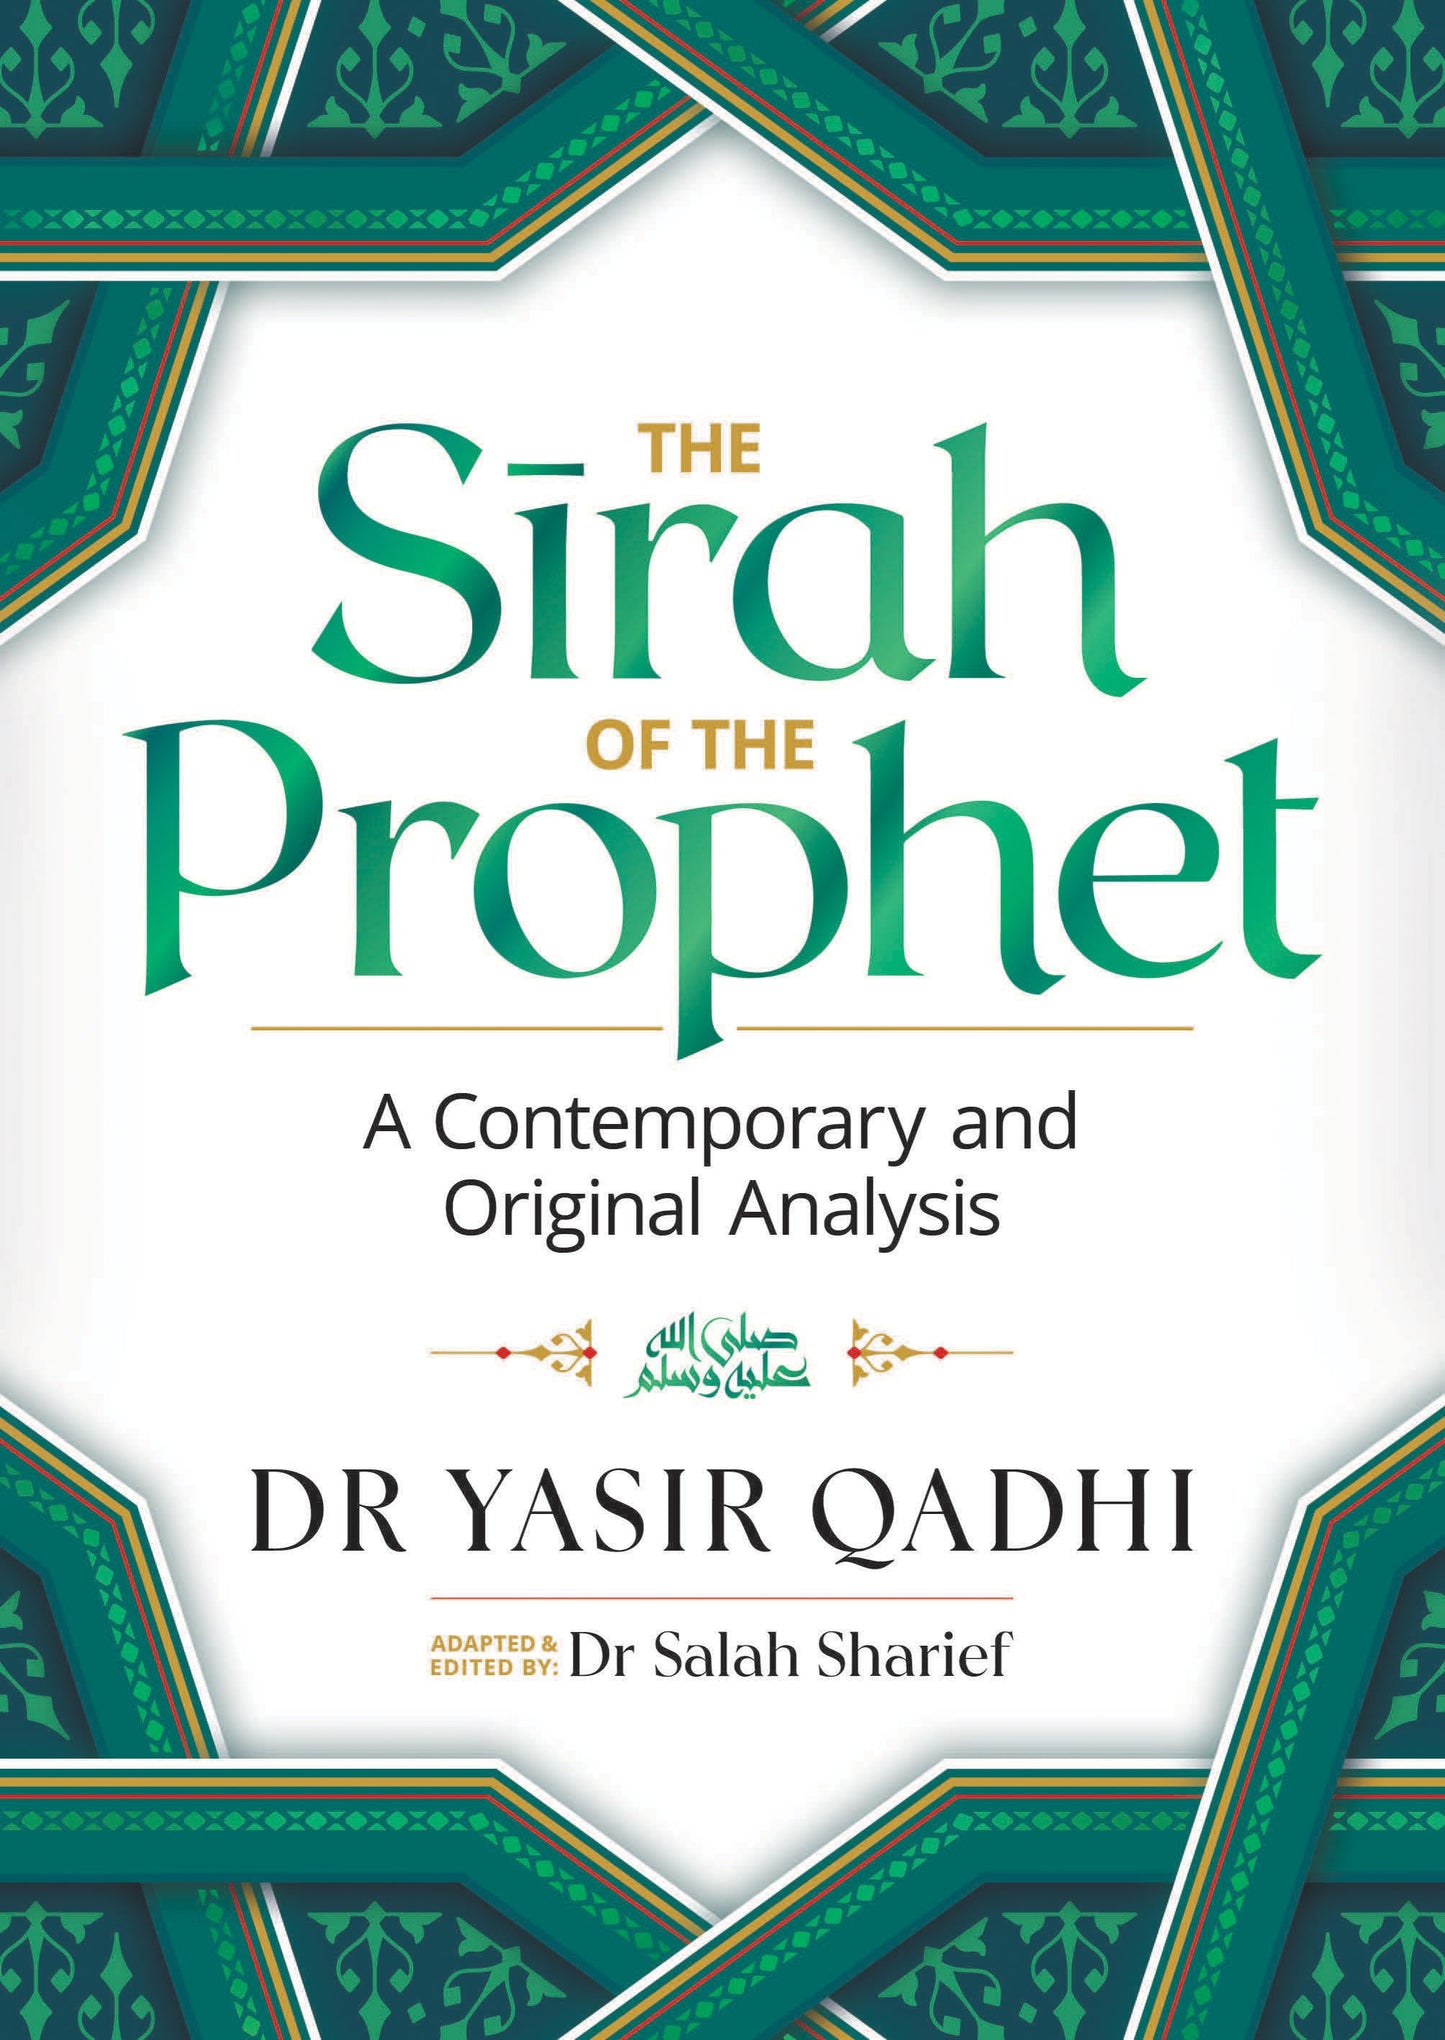 The Sirah of The Prophet